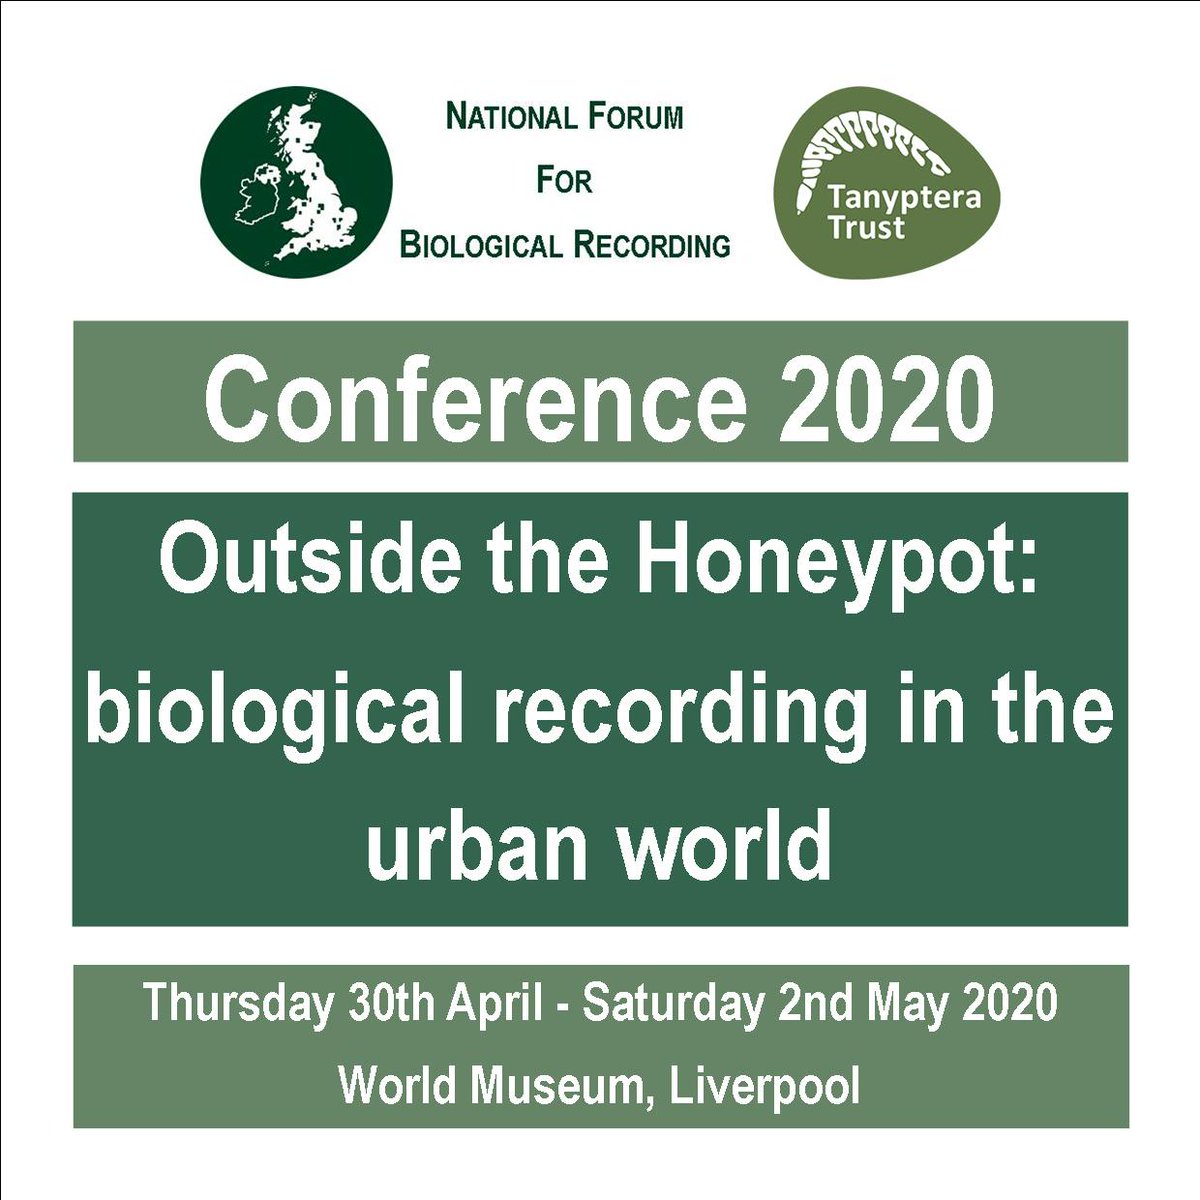 We'll be showing that there is plenty of wildlife in #urbanareas at the 2020 @_NFBR Conference. Liverpool 30th Apr - 2nd May, save the date! #NBNconf19